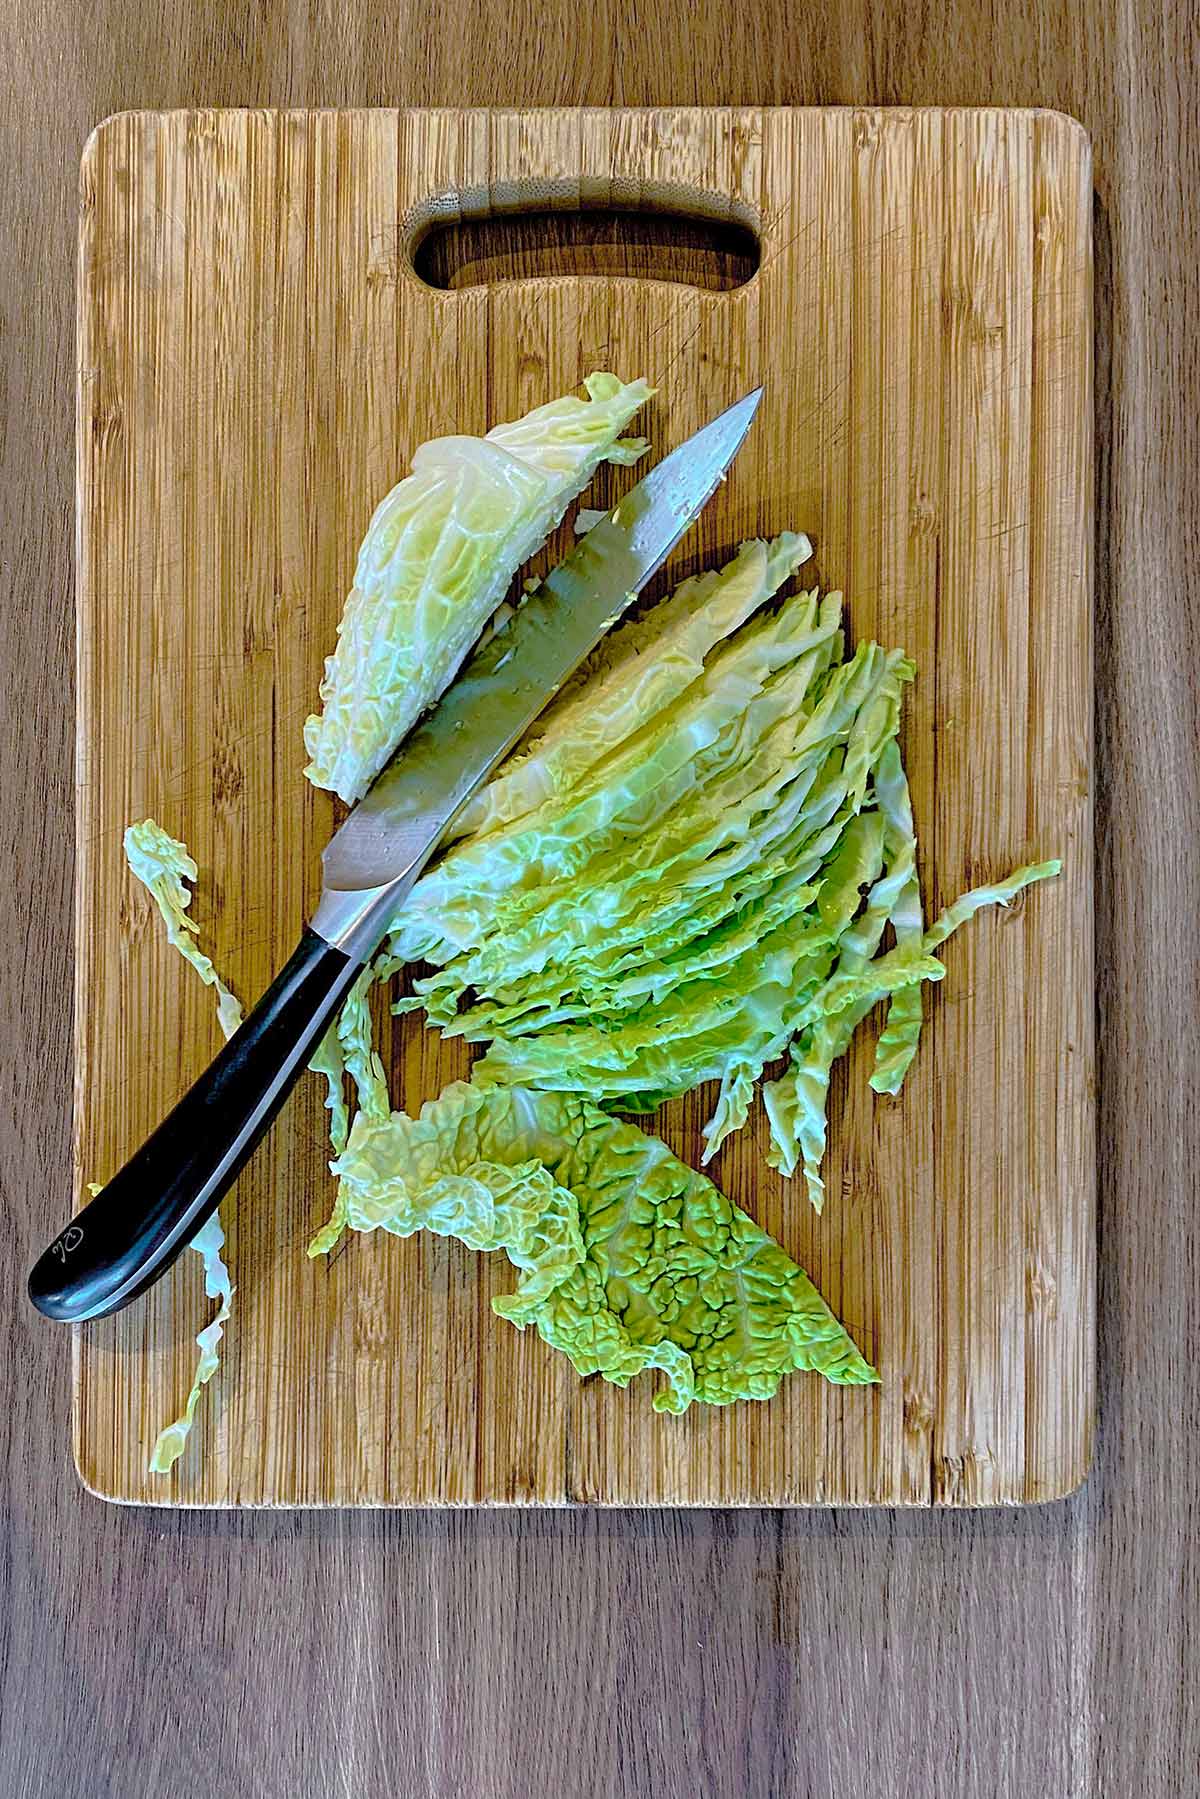 A chopping board with a shredded cabbage and a chef's knife on it.